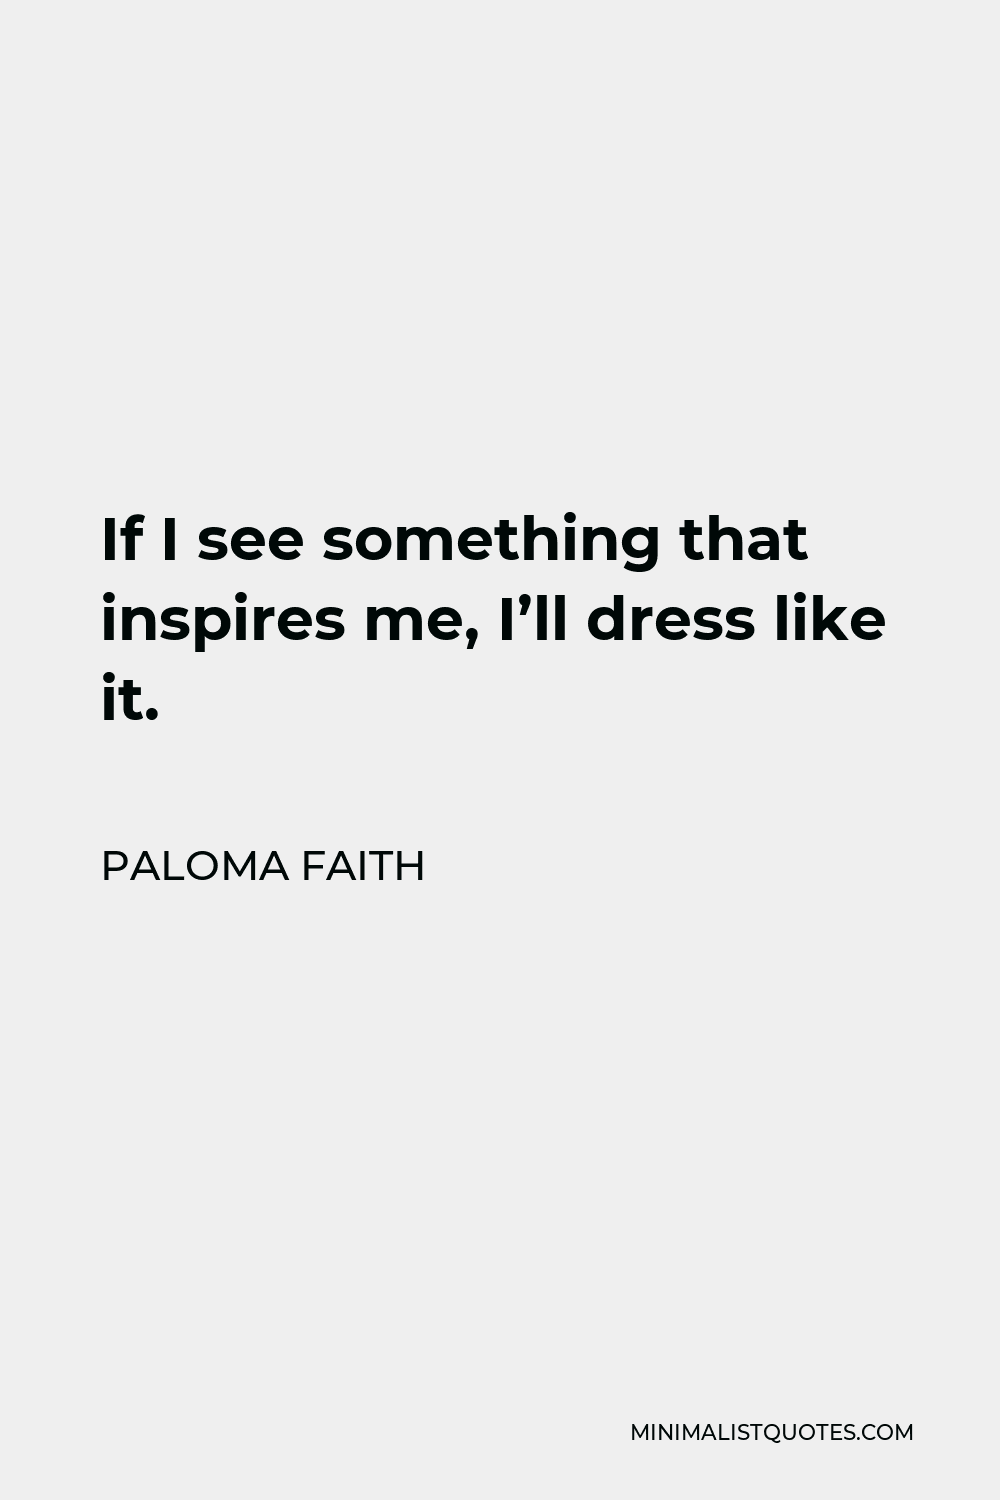 Paloma Faith Quote - If I see something that inspires me, I’ll dress like it.